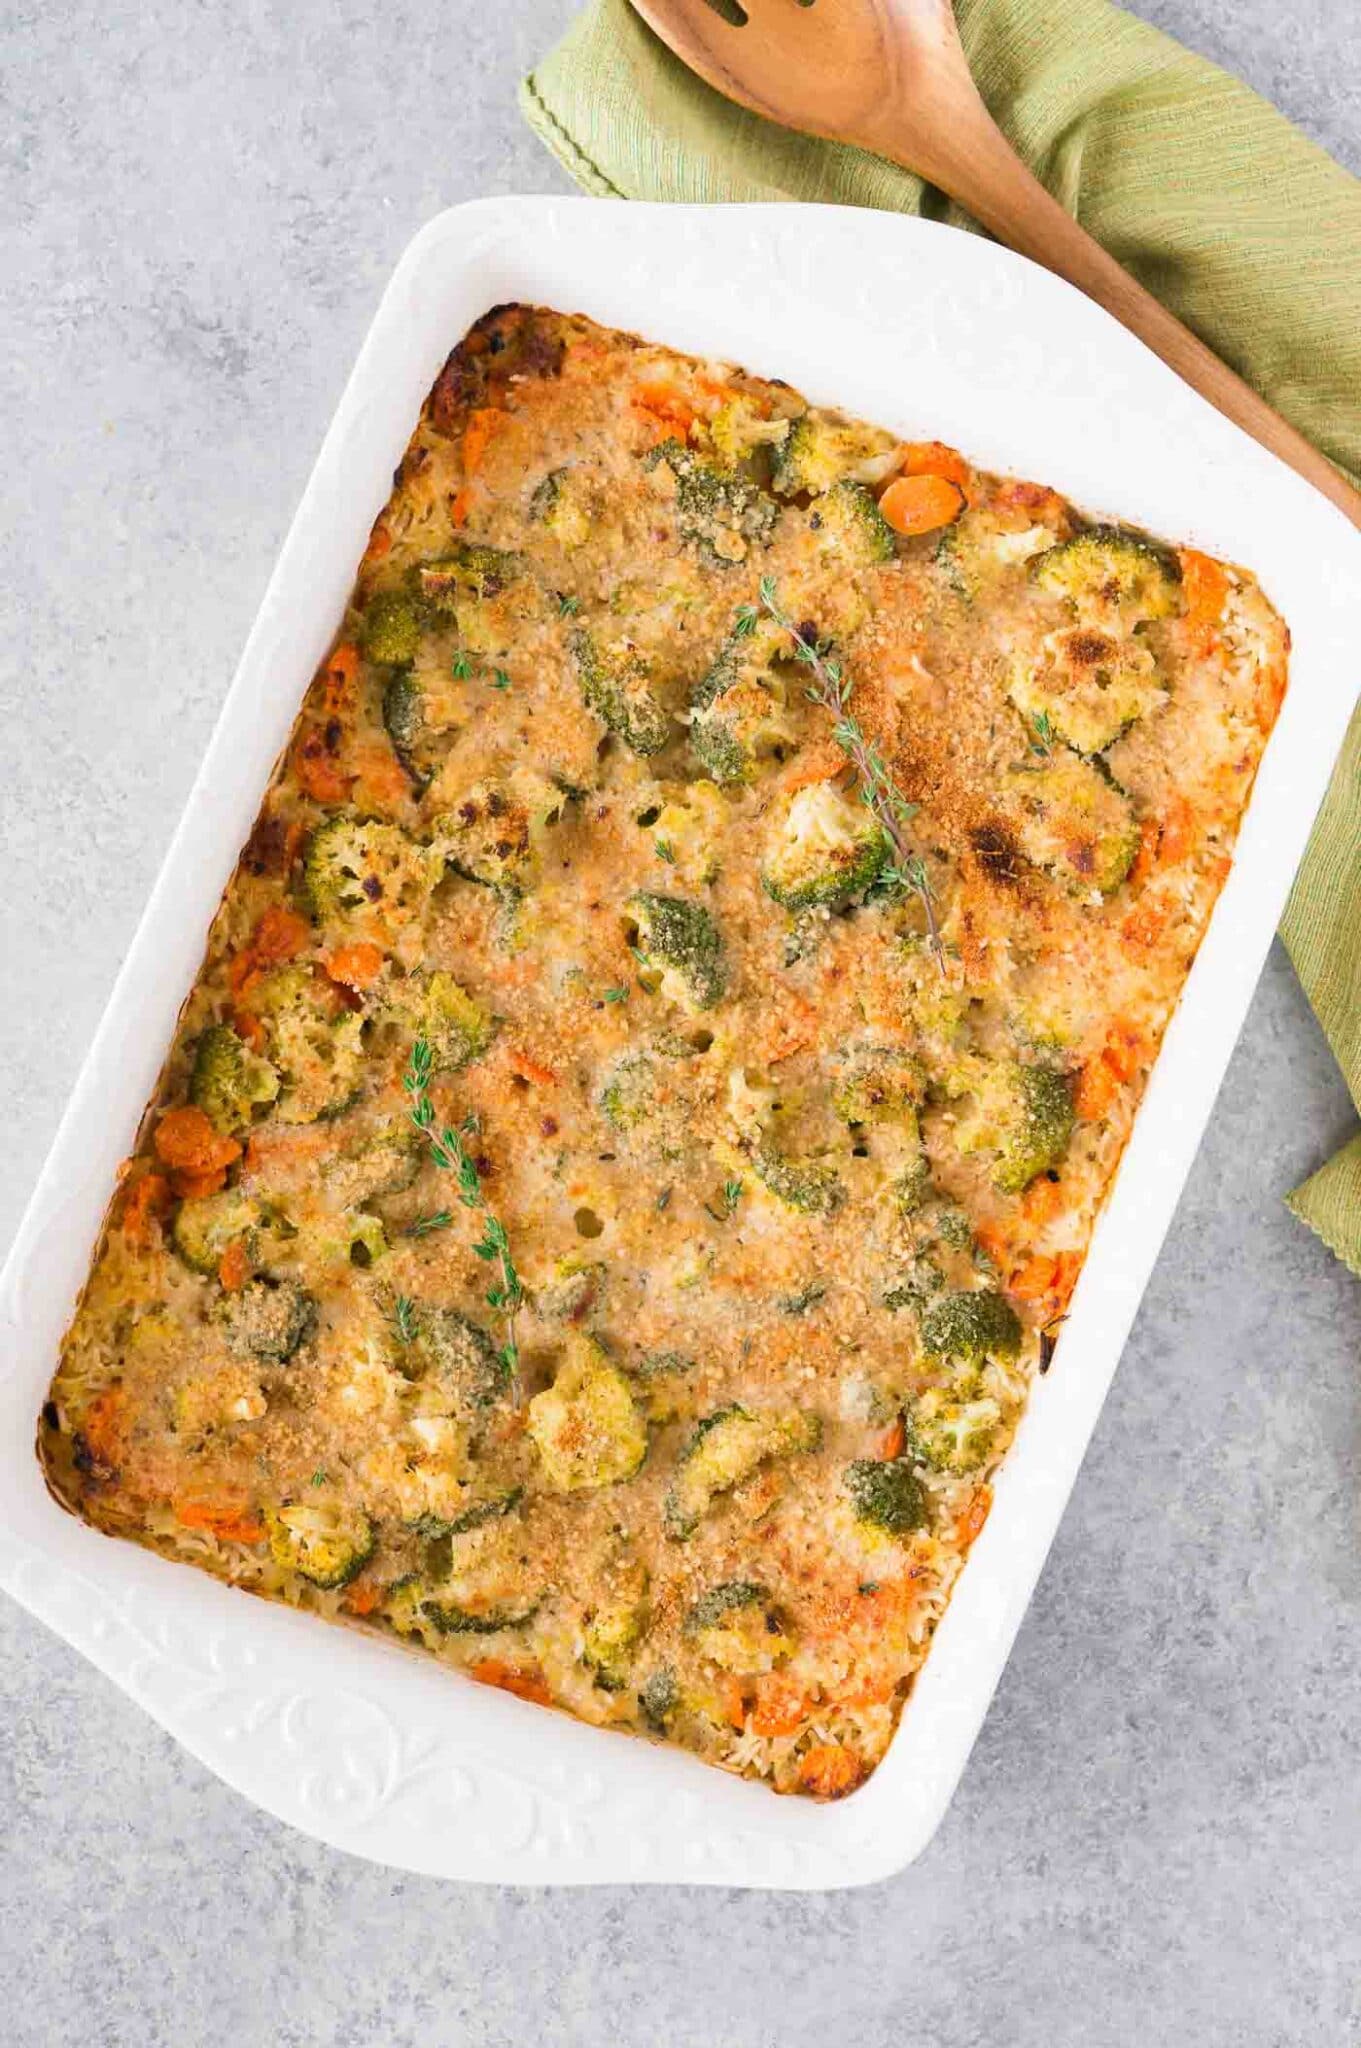 image from top of broccoli rice casserole with cheese